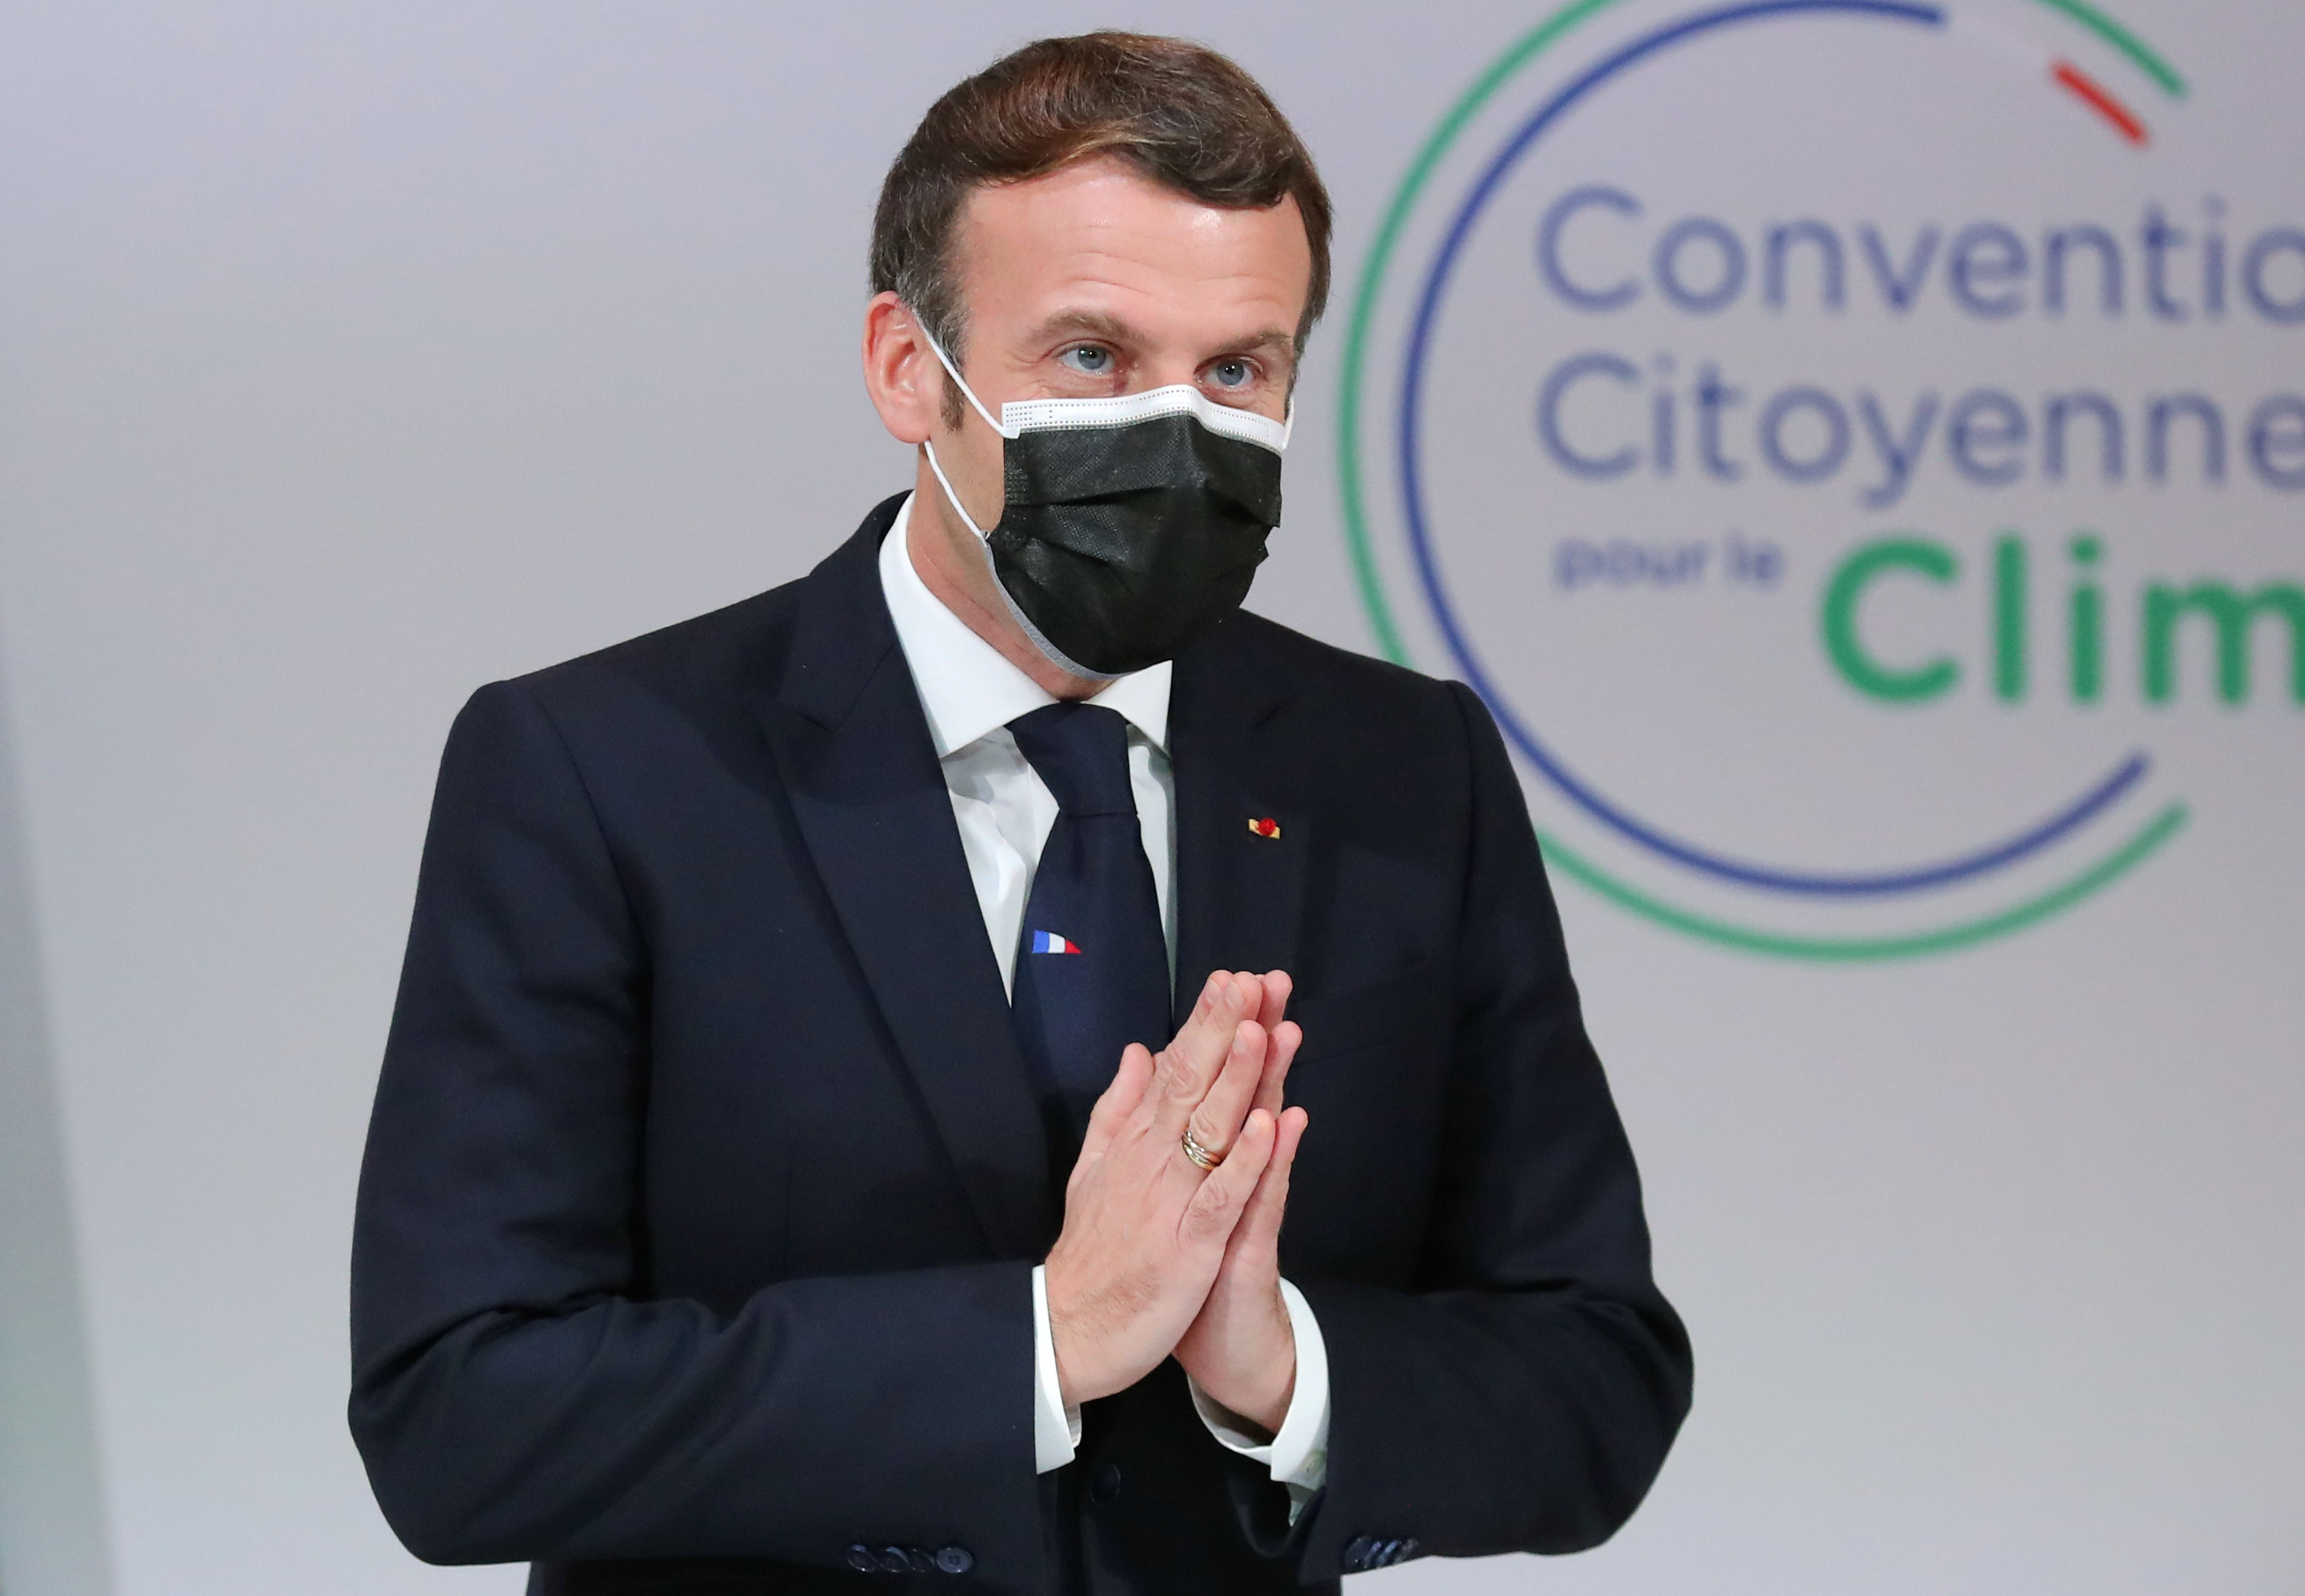 French President Emmanuel Macron gestures as he attends a meeting with members of the Citizens' Convention on Climate. Credit: AFP Photo